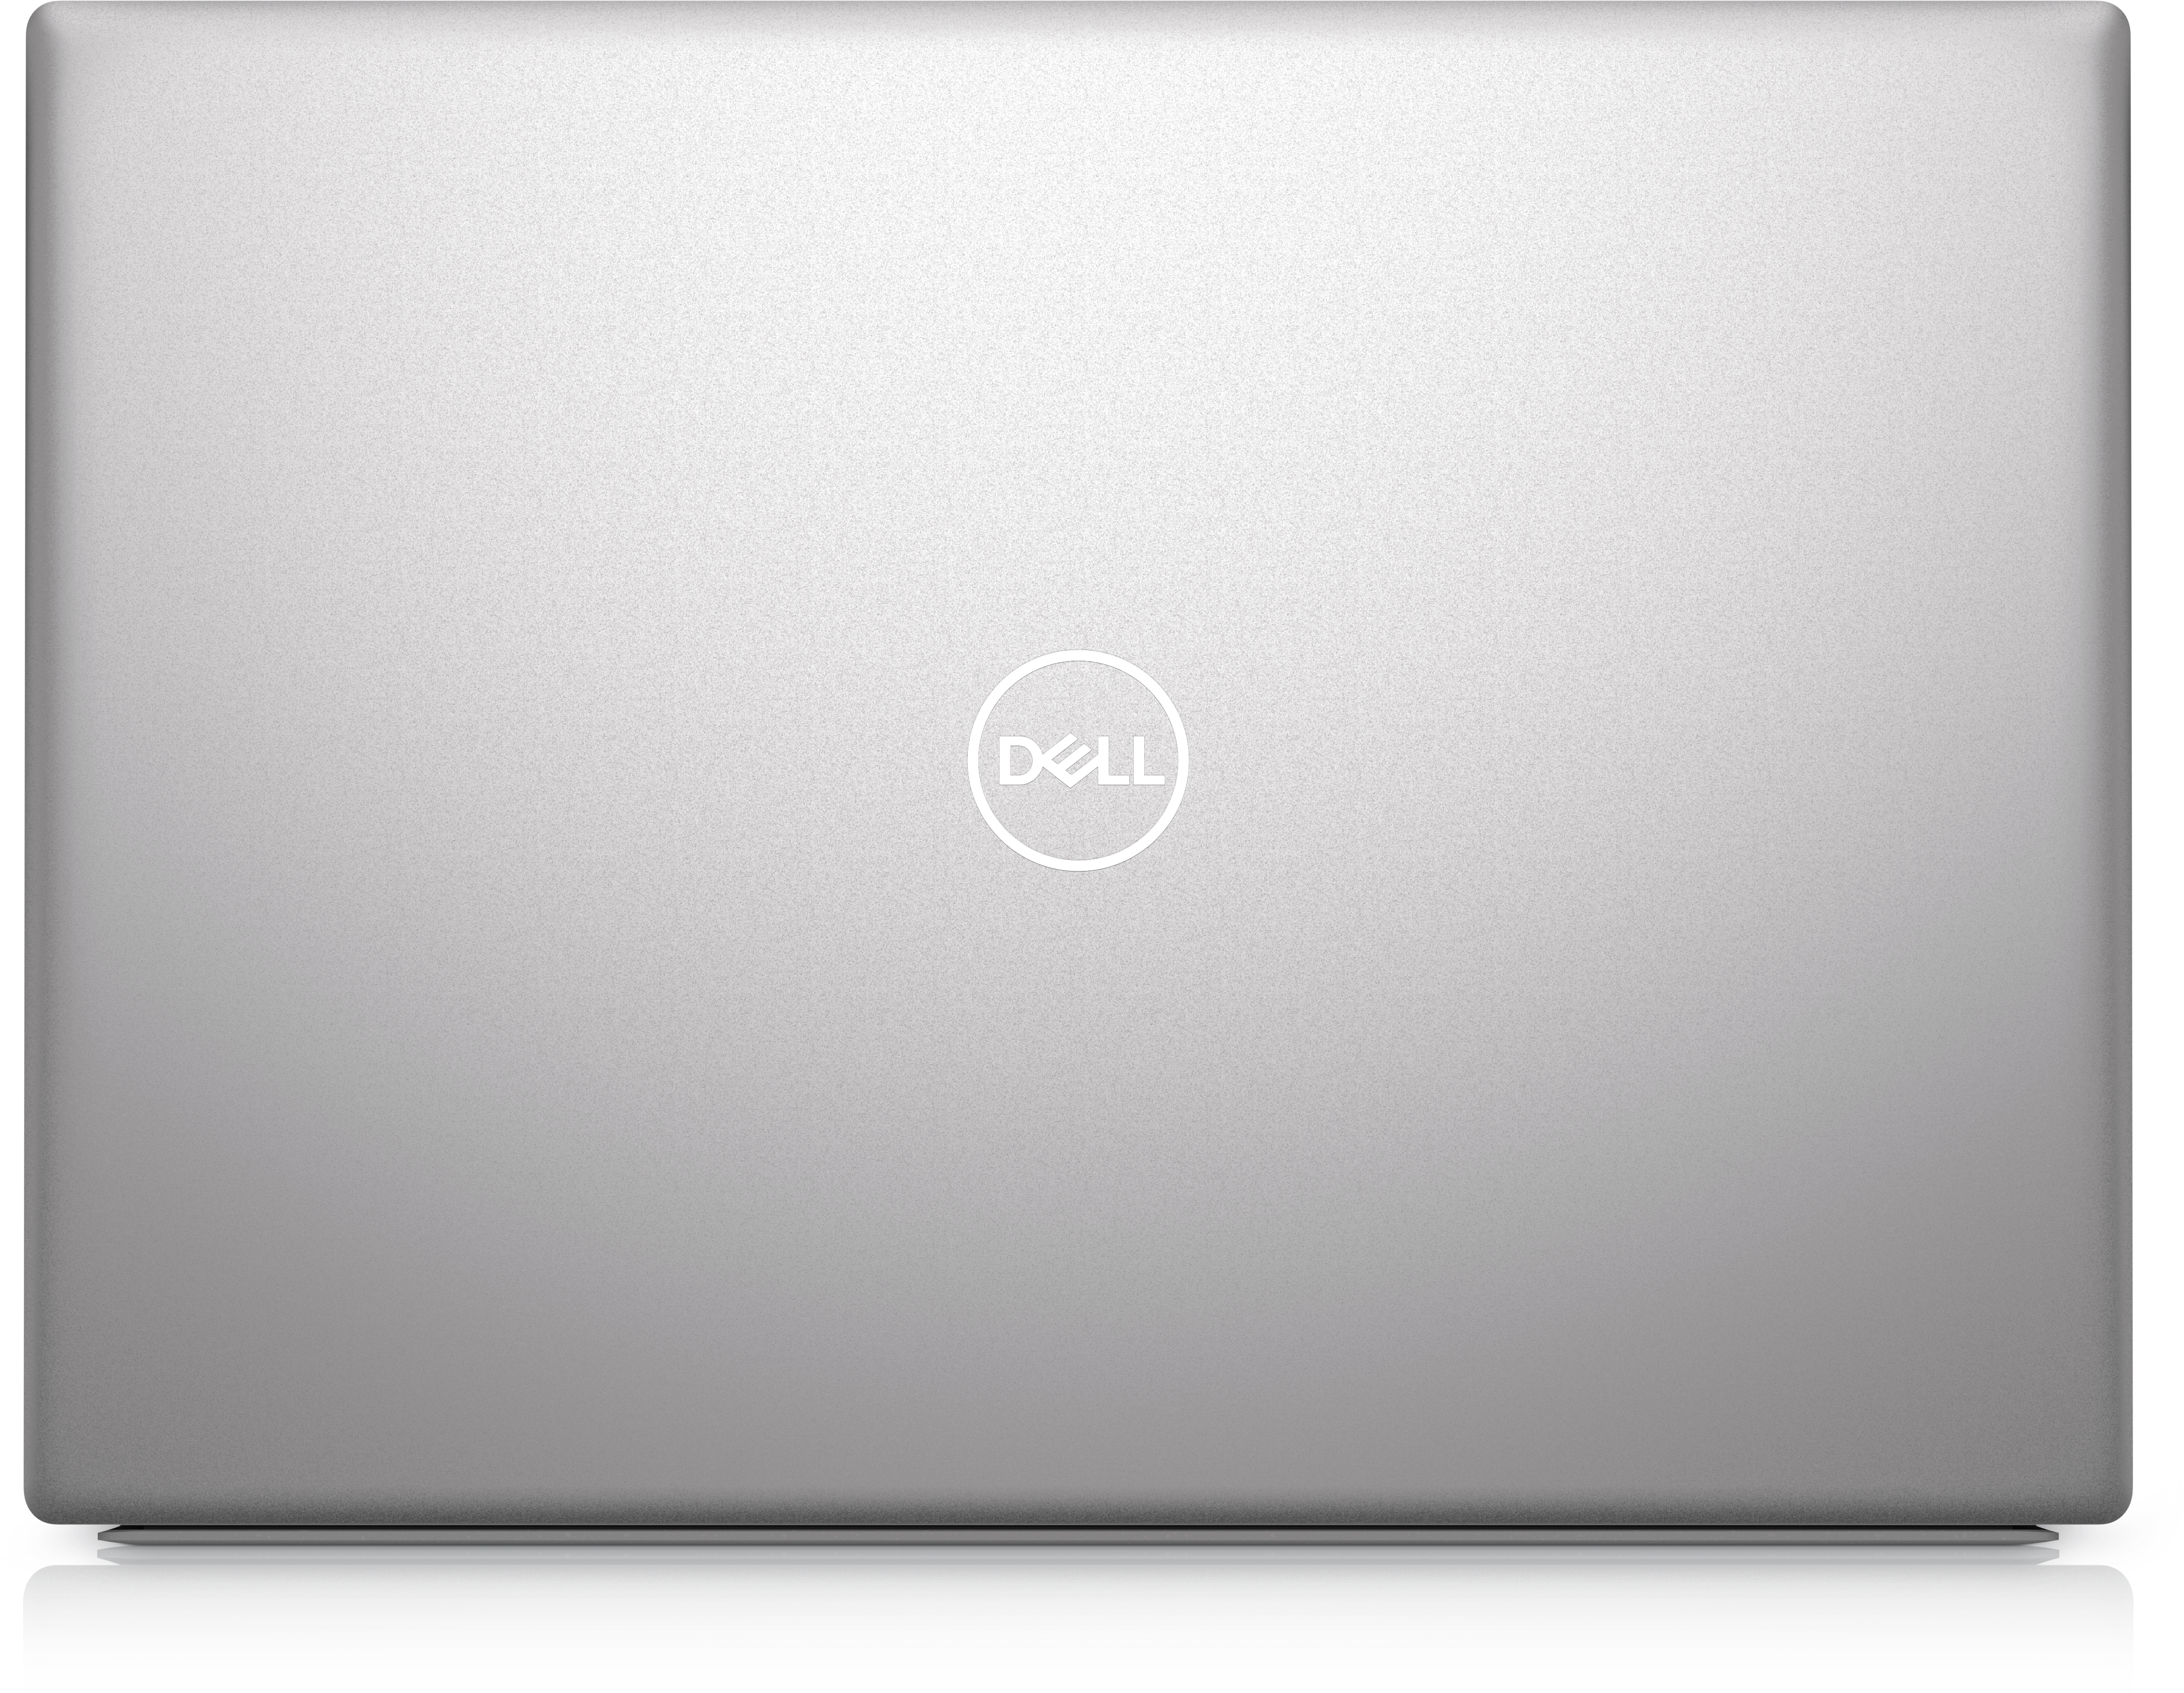 Inspiron 5425 14-inch Laptop with AMD Mobile Processor | Dell USA